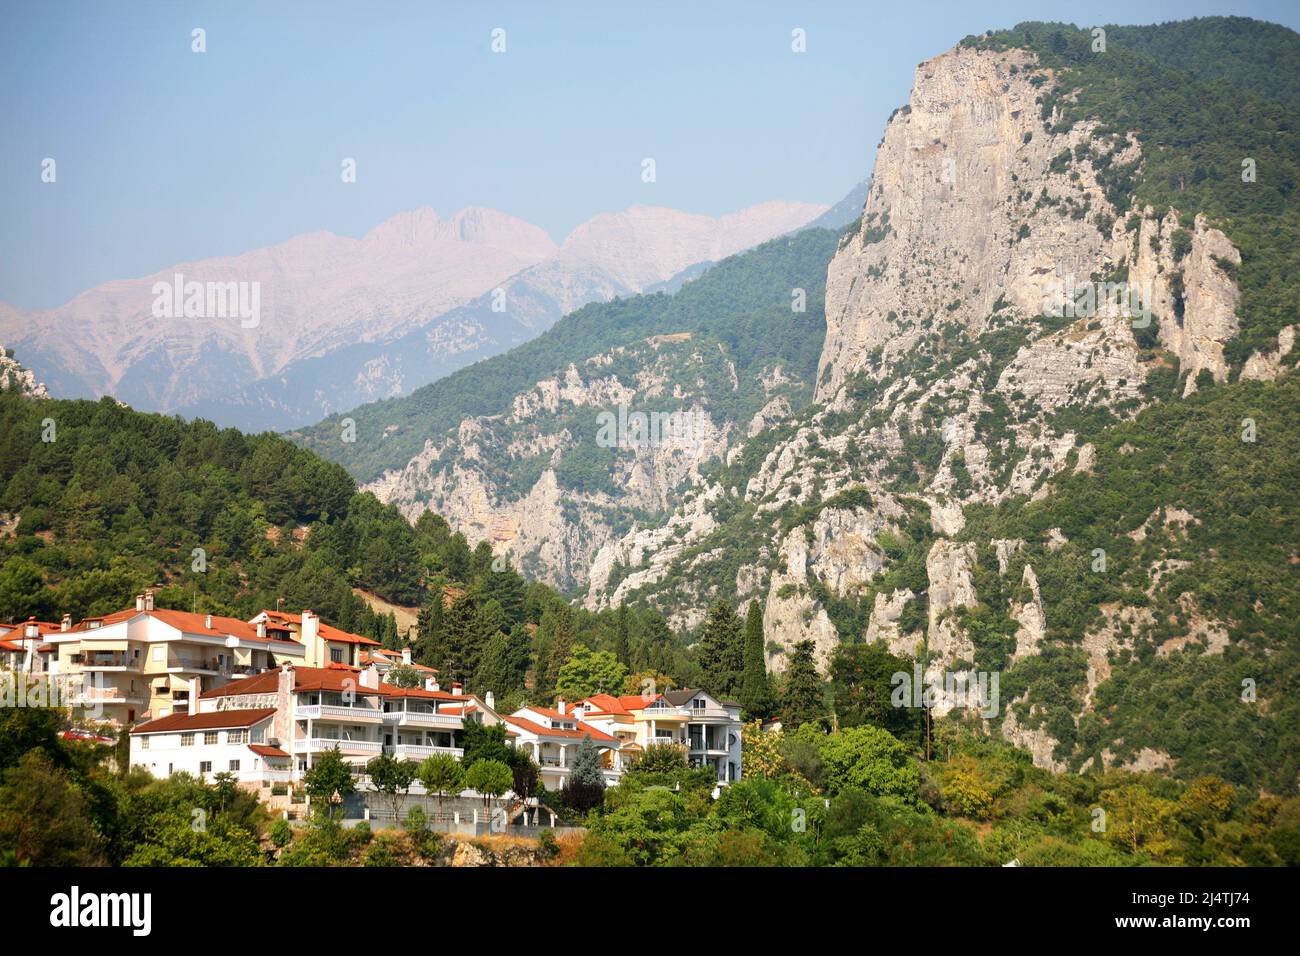 Small town Litochoro, beneath the Mount Olympus in Greece. Litochoro is last village before climbing Mount Olympus. Stock Photo